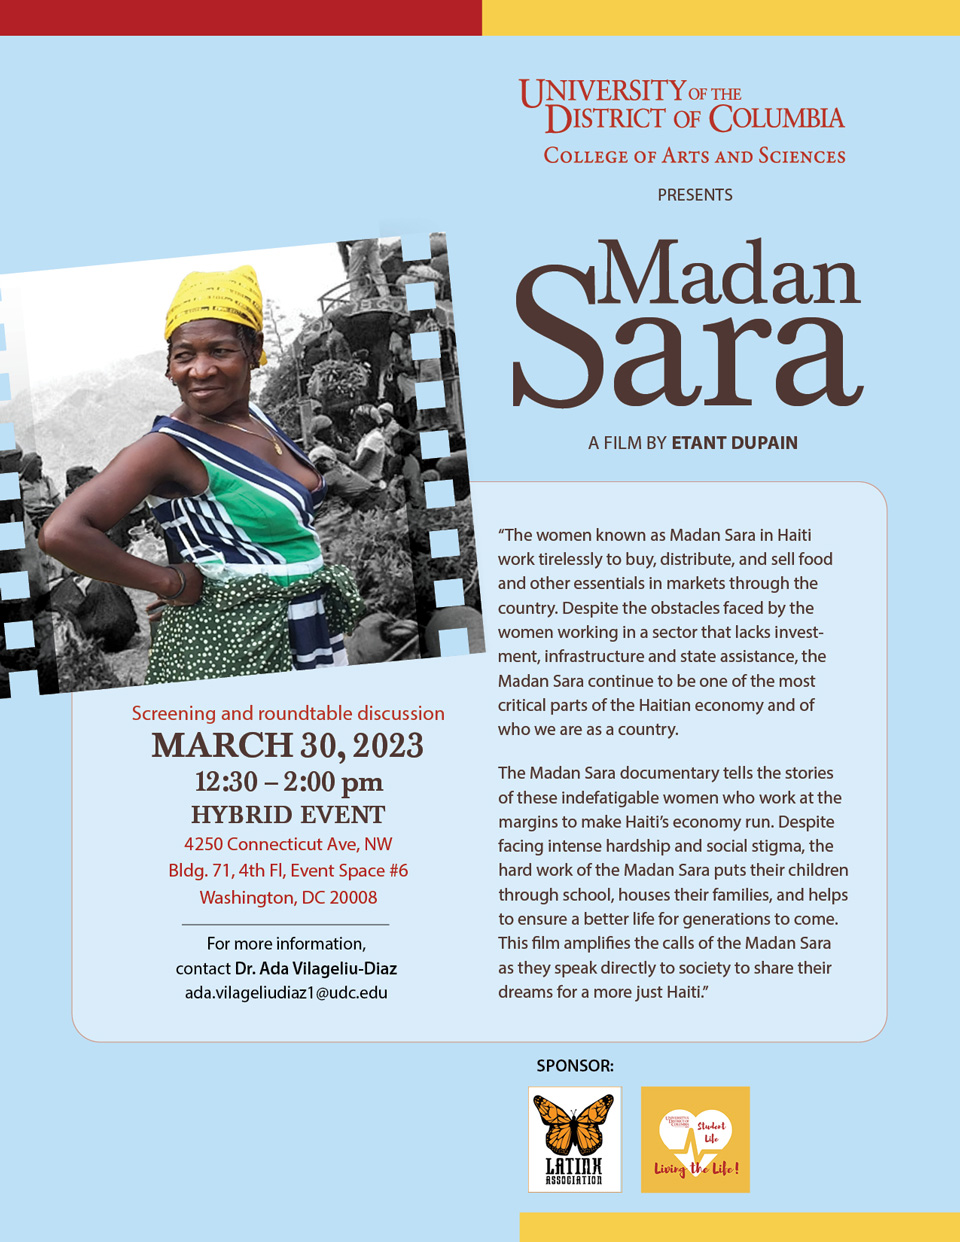 Please join the College of Arts and Sciences and the Latinx Student Association for a film screening and roundtable discussion of Madan Sara by Haitian filmmaker Etant Dupain. Guest speakers include Professor Dorothy Gaspard-St. Cyr, UDC Clinical Instructor of Speech-Language Pathology; Myrian Léger, Associate Director for ESPN; and Vanessa Charles Adrien, Founder of Women Empowerment Network, a non-profit organization based in Haiti. This hybrid event will take place on Thursday, March 30, 2023, from 12:30 to 2:00 p.m. In-person: 4250 Connecticut Ave, NW, Bldg. 71, 4th Floor, Event Space #6 (space is limited, please RSVP to ada.vilageliudiaz1@udc.edu) Online registration required at: https://udc-edu.zoom.us/meeting/register/tZcpduCtpzssE906HcJ4DWW2JGhJ8dcJN3Fc About the film, from Etant Dupain: “The women known as Madan Sara in Haiti work tirelessly to buy, distribute, and sell food and other essentials in markets through the country. Despite the obstacles faced by the women working in a sector that lacks investment, infrastructure and state assistance, the Madan Sara continue to be one of the most critical parts of the Haitian economy and of who we are as a country. The Madan Sara documentary tells the stories of these indefatigable women who work at the margins to make Haiti’s economy run. Despite facing intense hardship and social stigma, the hard work of the Madan Sara puts their children through school, houses their families, and helps to ensure a better life for generations to come. This film amplifies the calls of the Madan Sara as they speak directly to society to share their dreams for a more just Haiti.” For more information, contact Dr. Ada Vilageliu-Diaz at ada.vilageliudiaz1@udc.edu